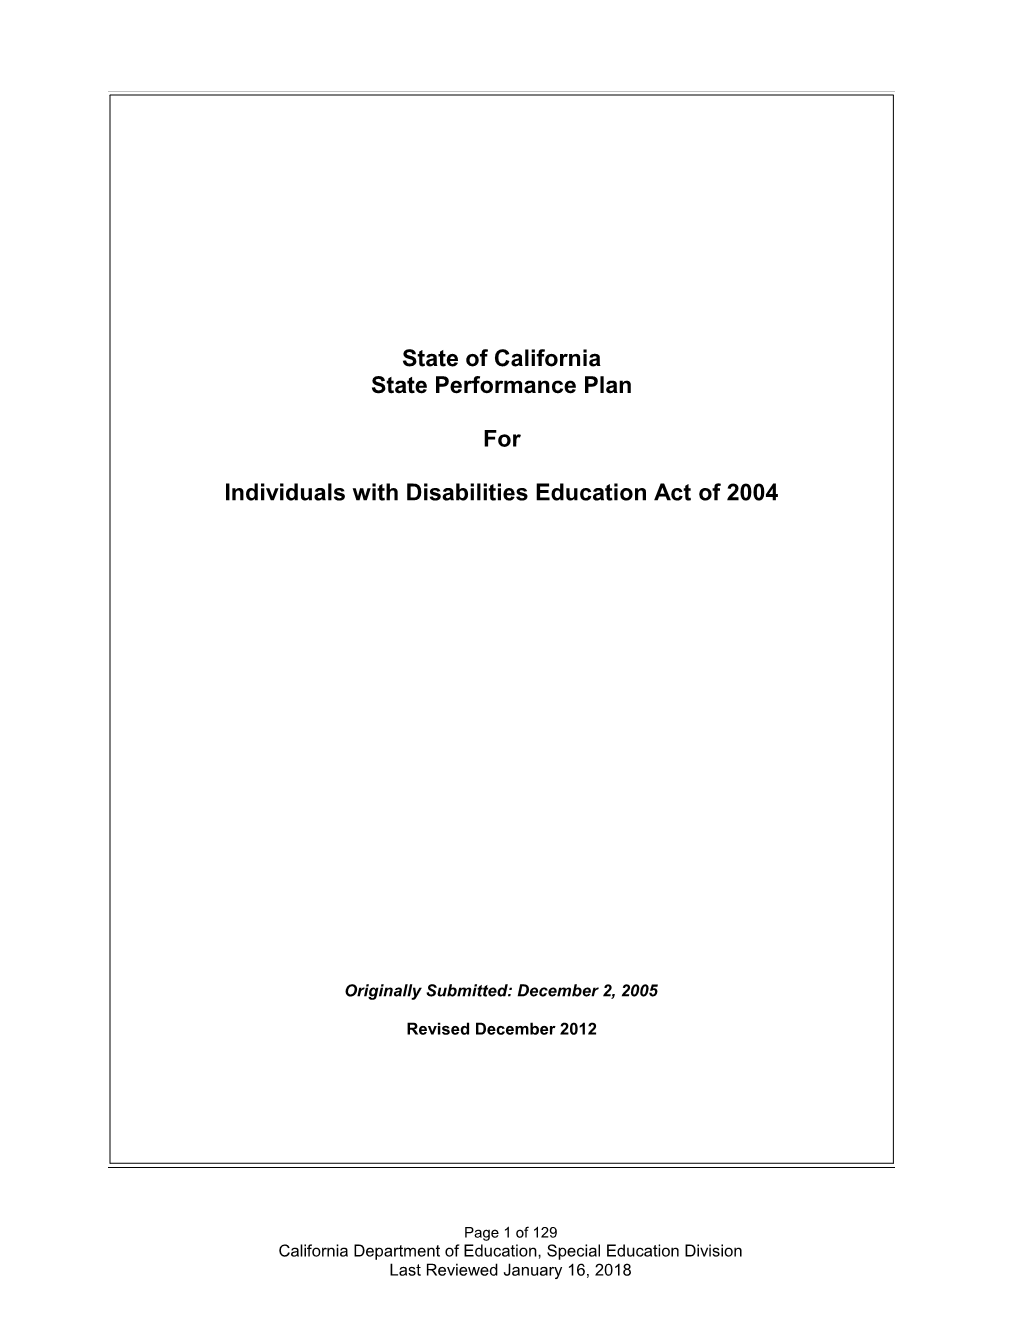 State Performance Plan 2011 - Quality Assurance Process (CA Dept of Education)